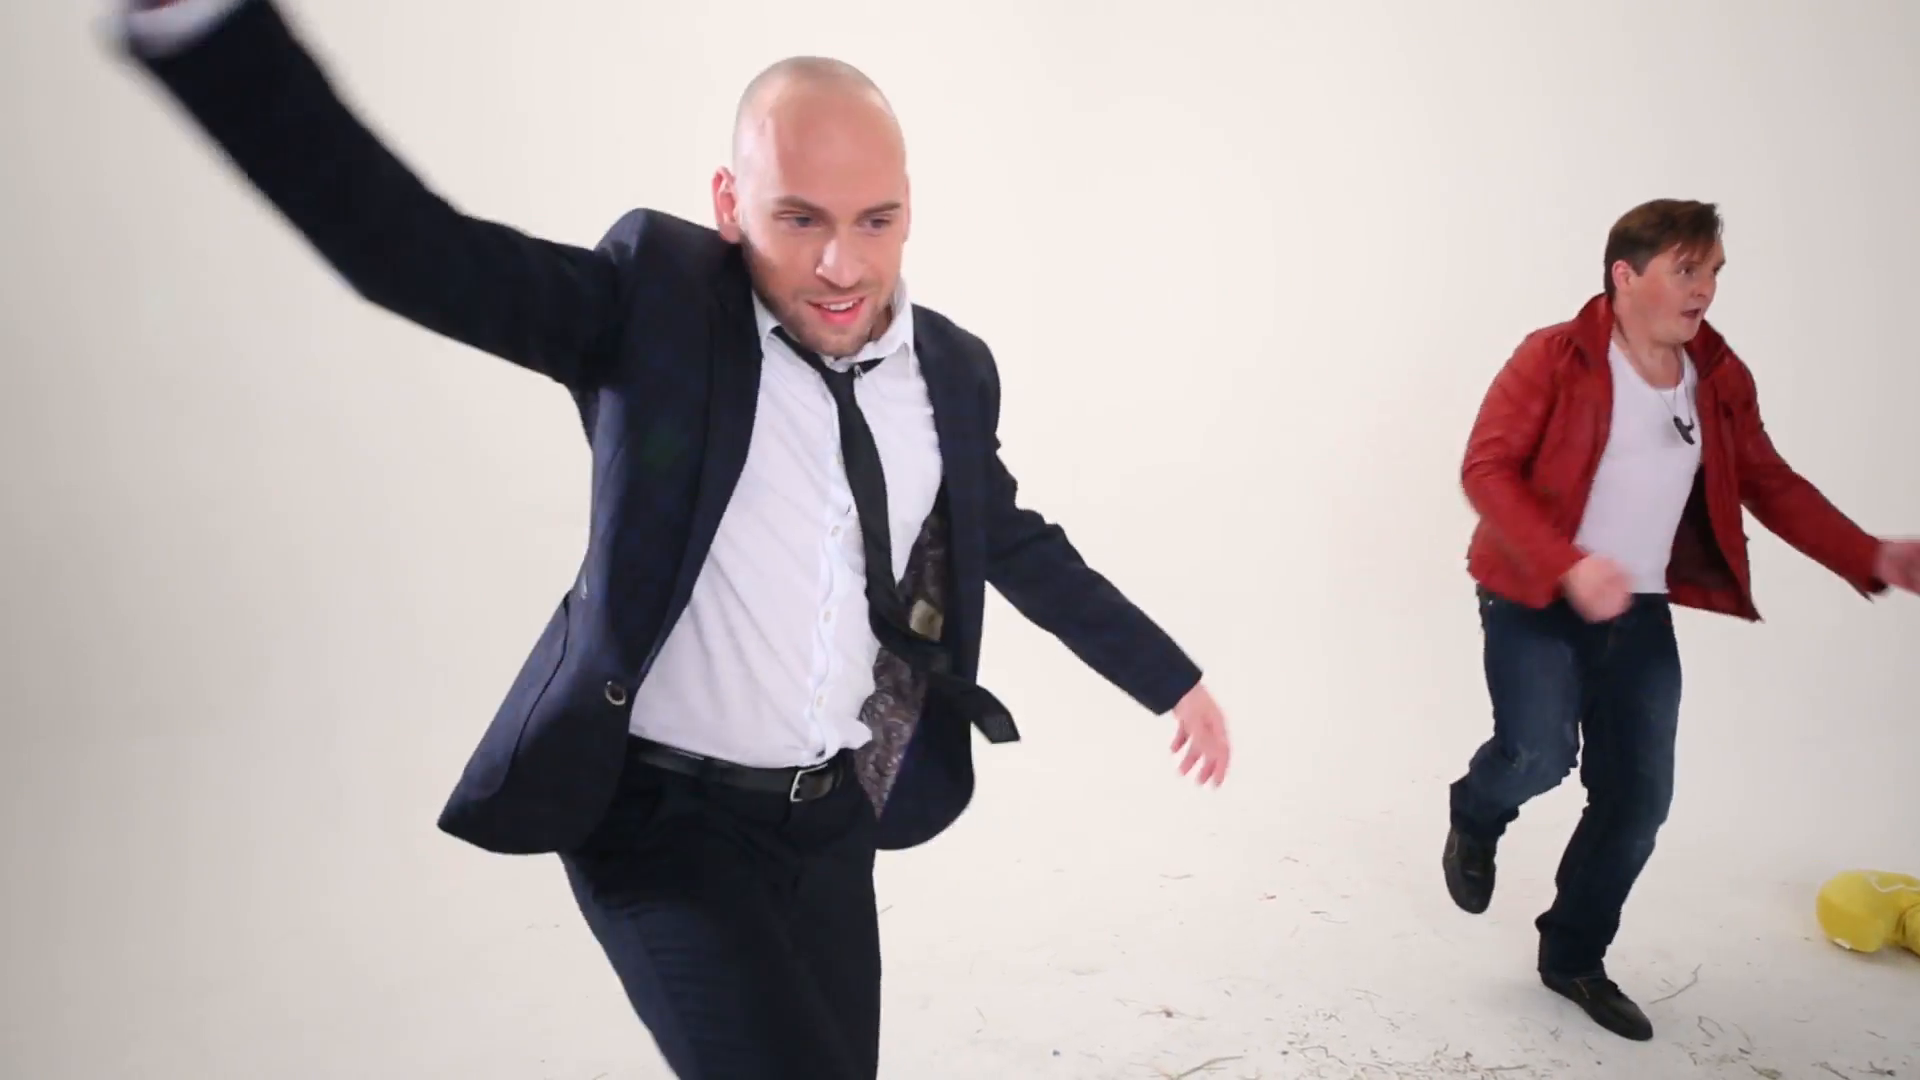 Bald man in suit and man in red jacket dance on floor with hay in ...